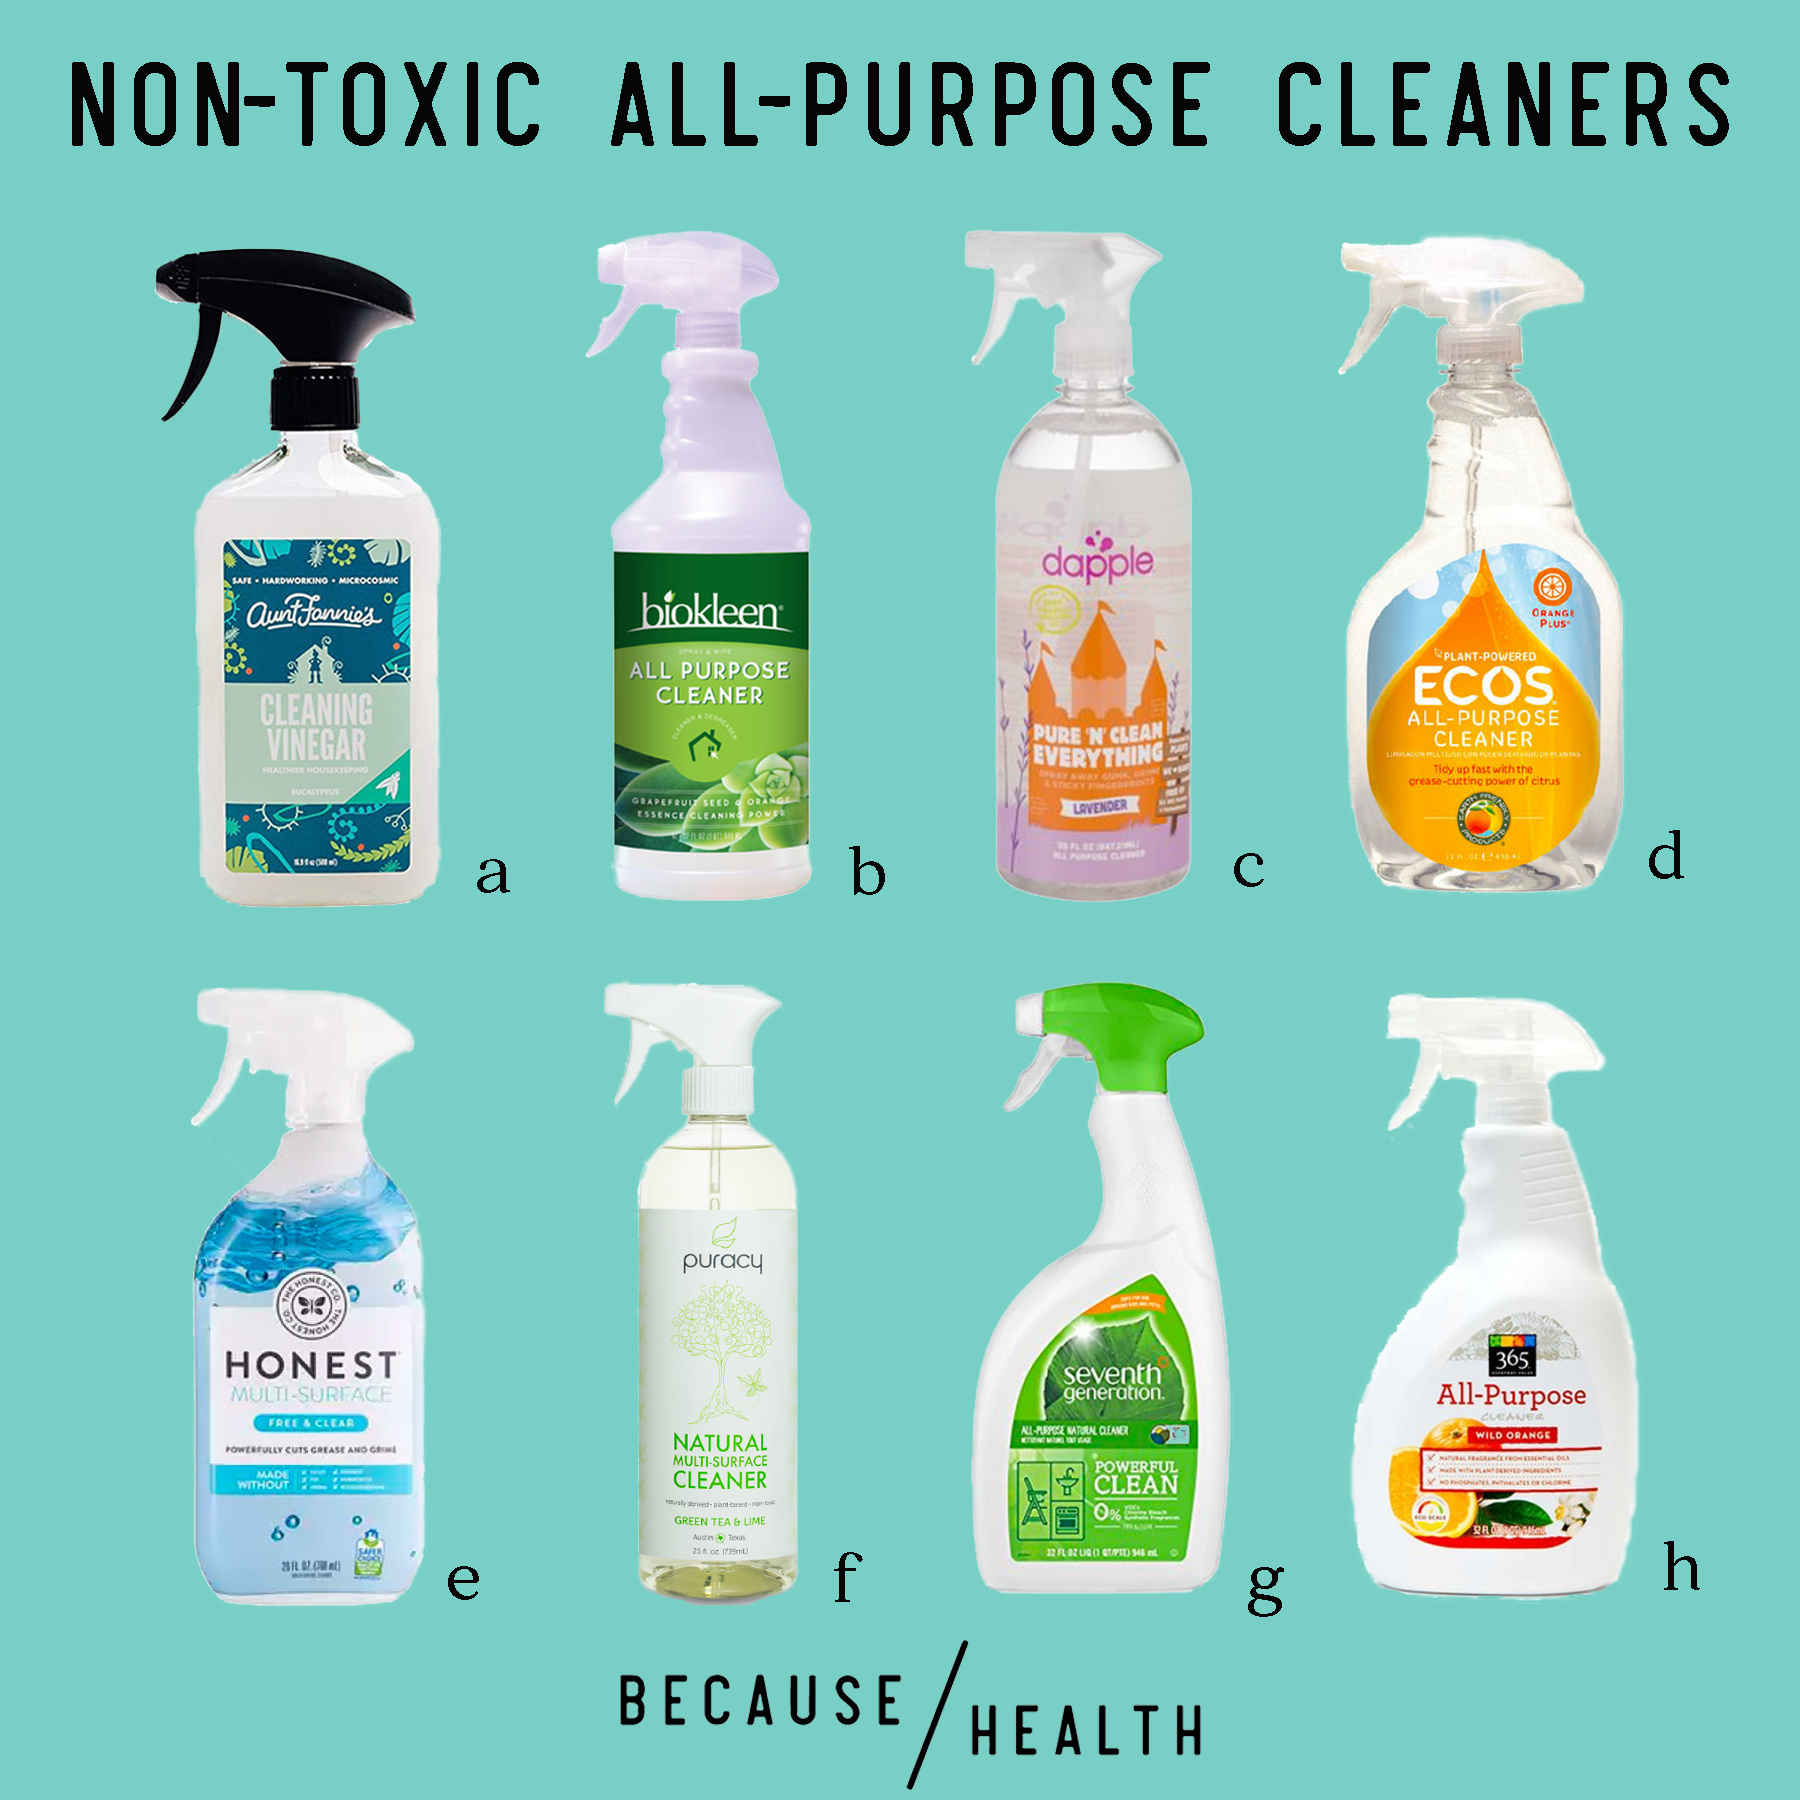 Common Household Cleaning Agents: Safety and Efficacy - Trusted